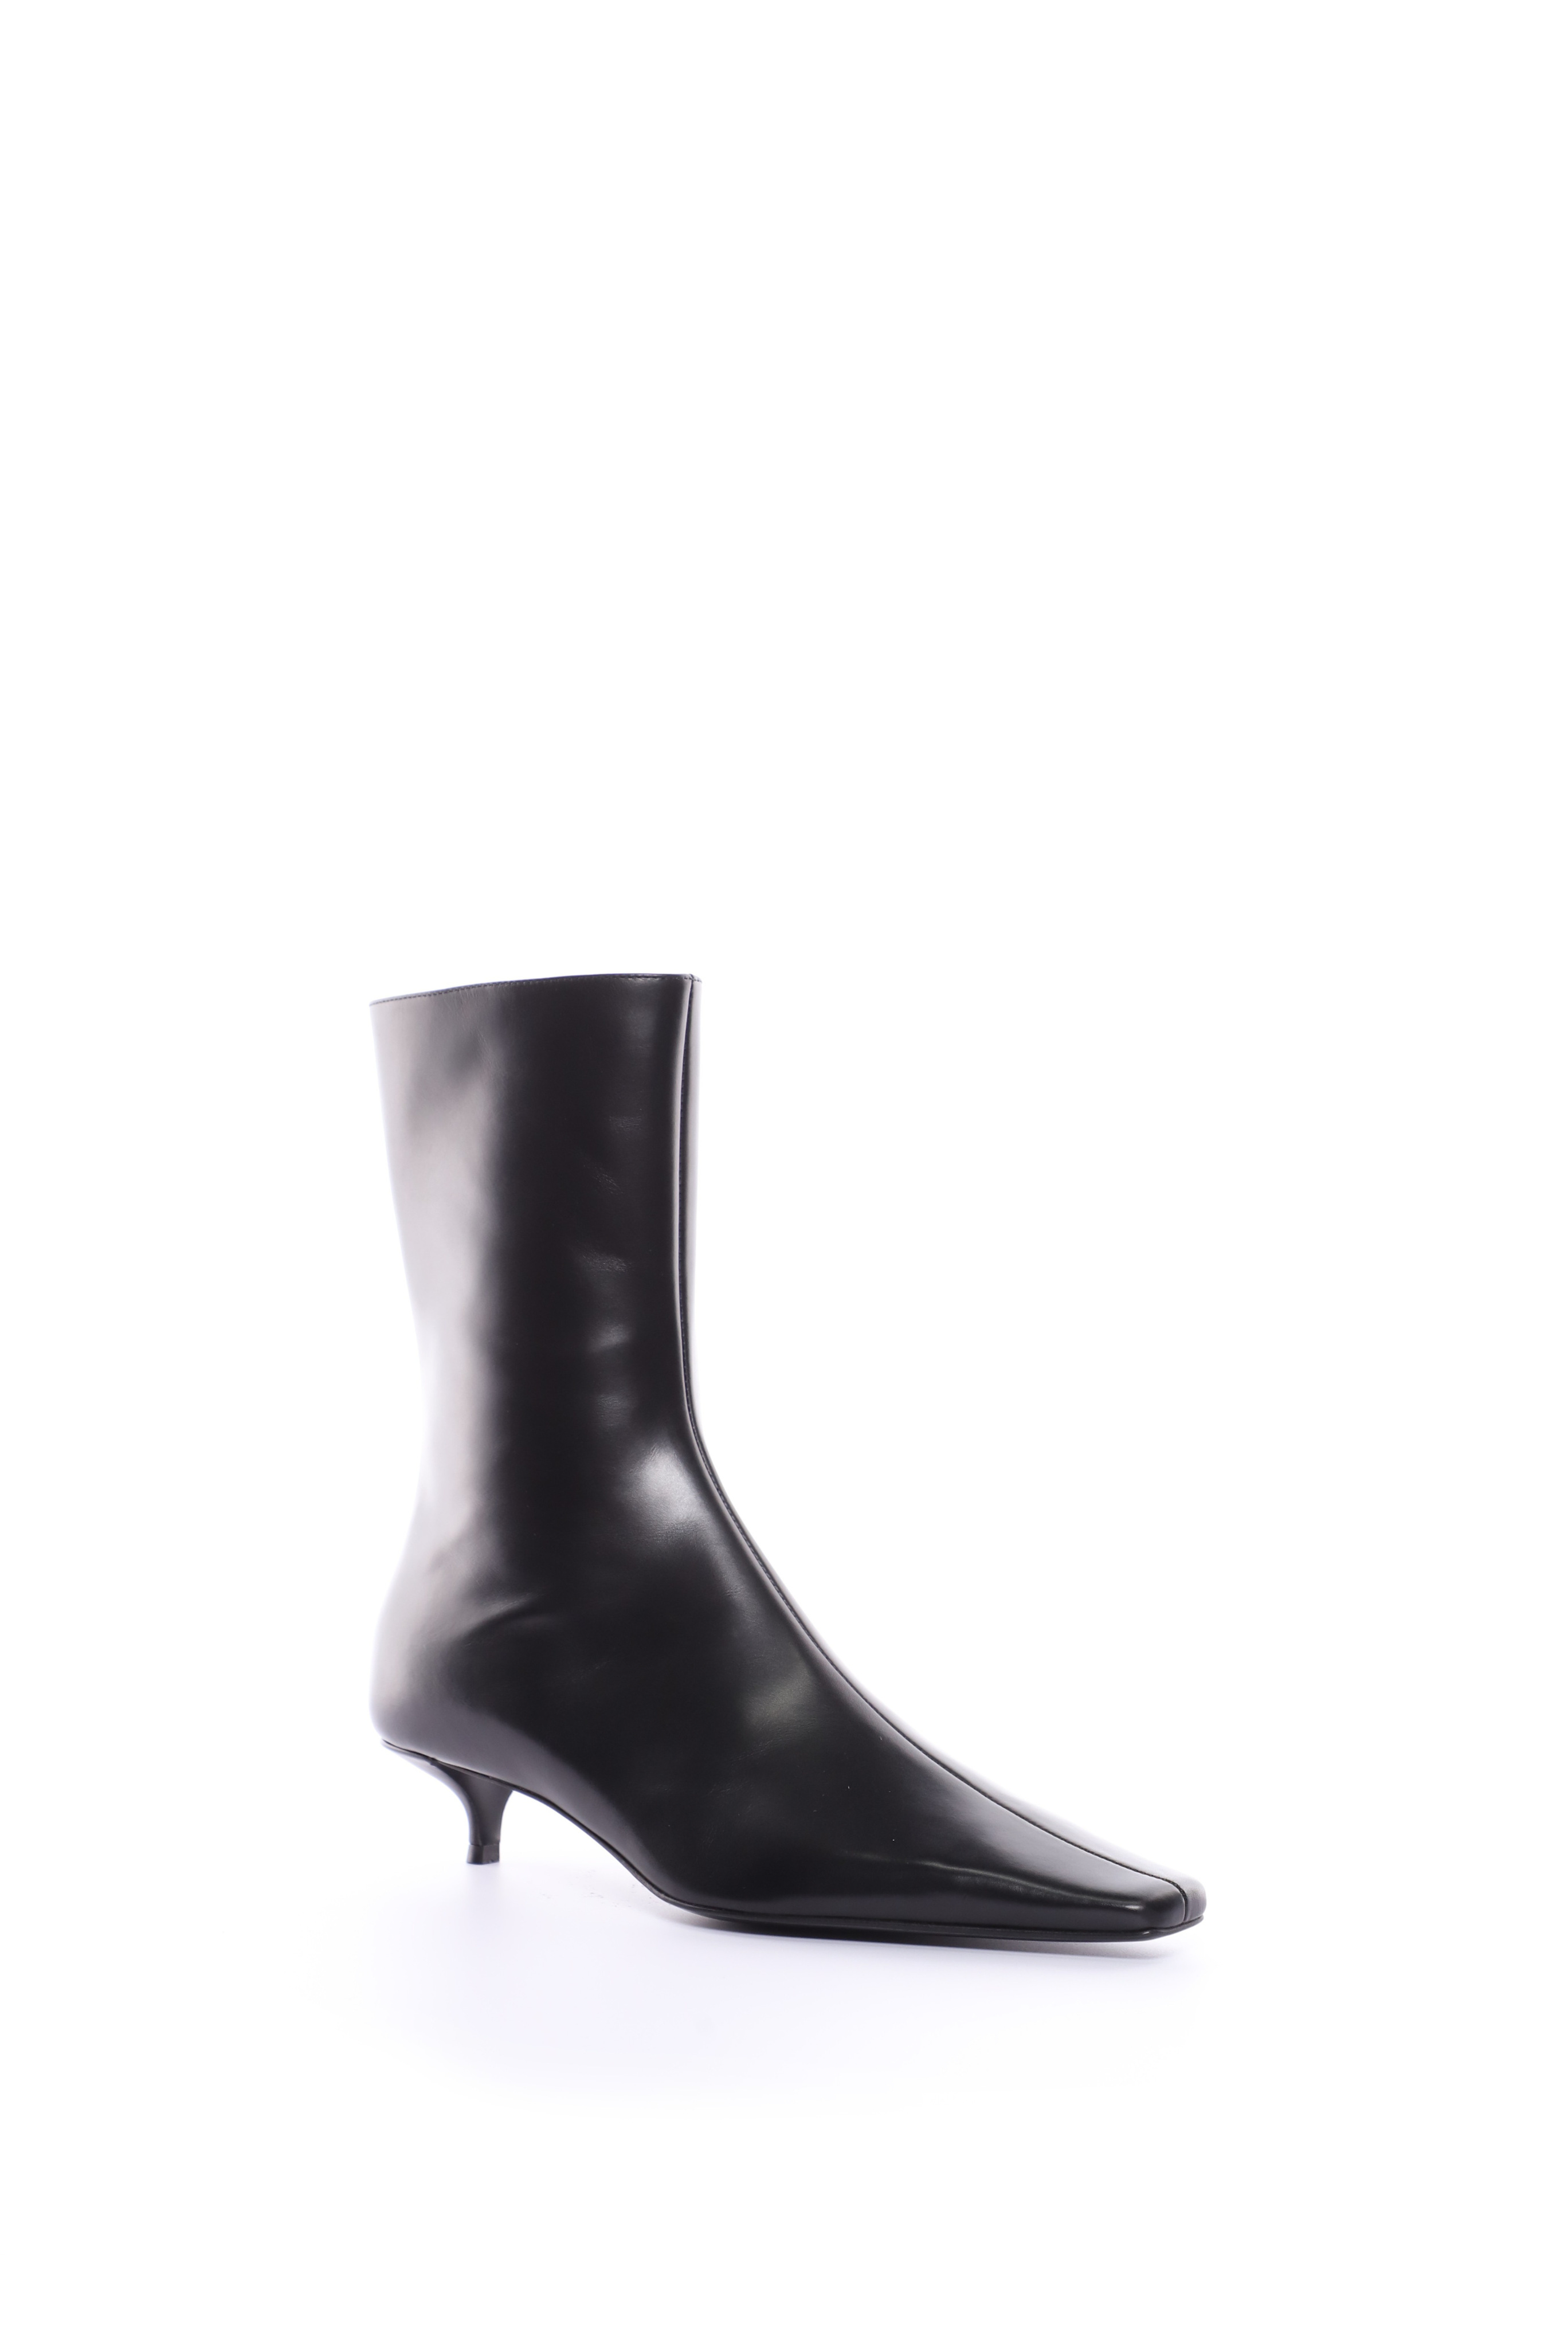 THE ROW Shrimpton Leather Boots